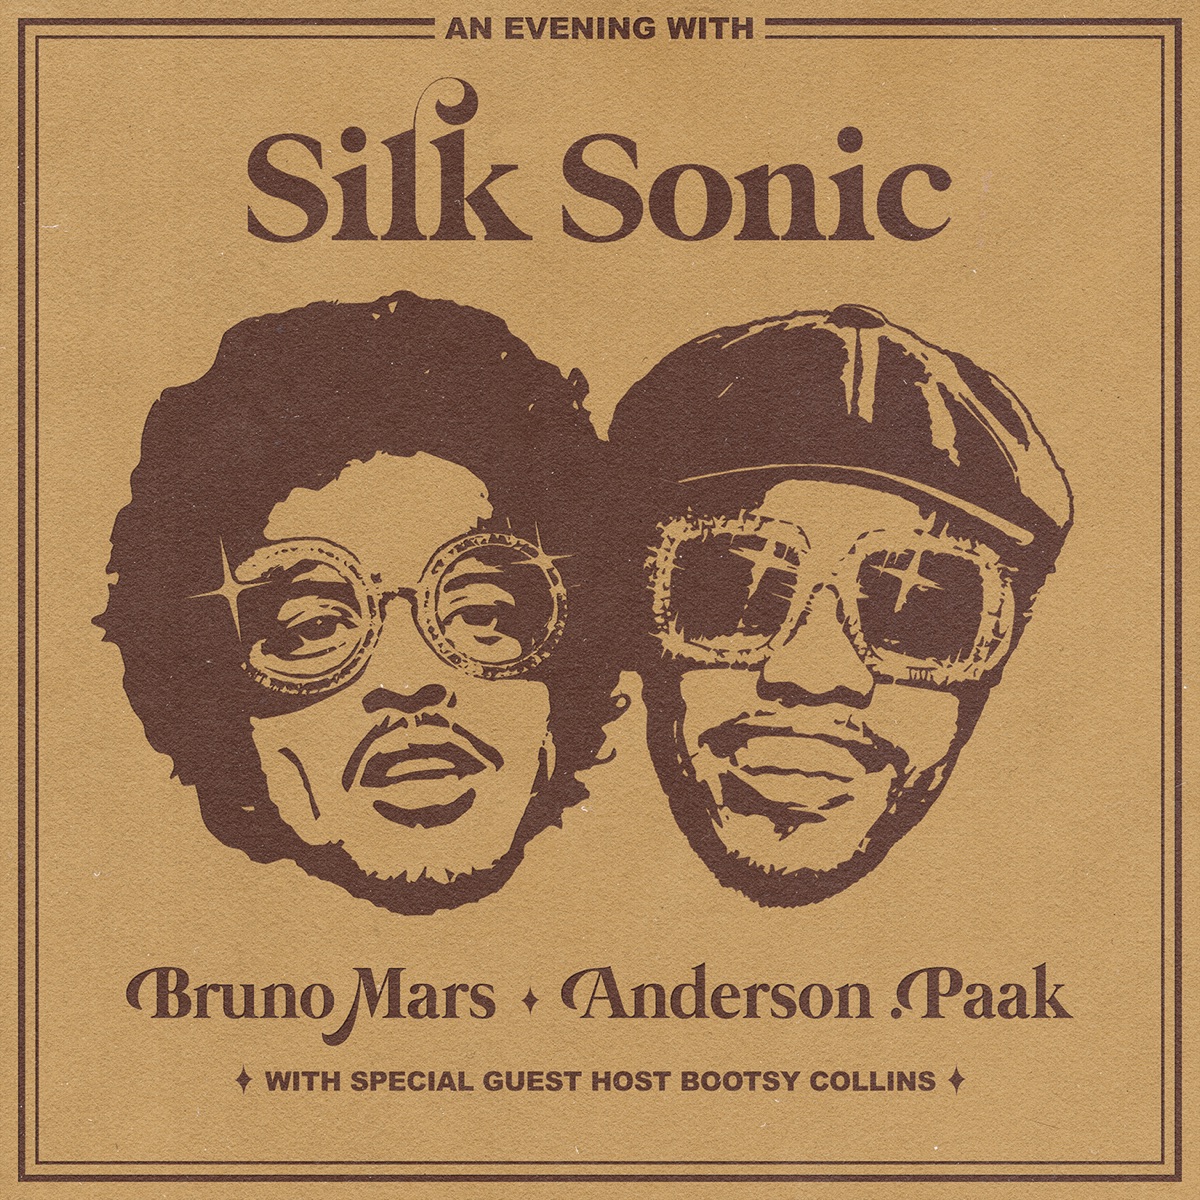 Cover for『Bruno Mars, Anderson .Paak, Silk Sonic - After Last Night (with Thundercat & Bootsy Collins)』from the release『An Evening With Silk Sonic 』